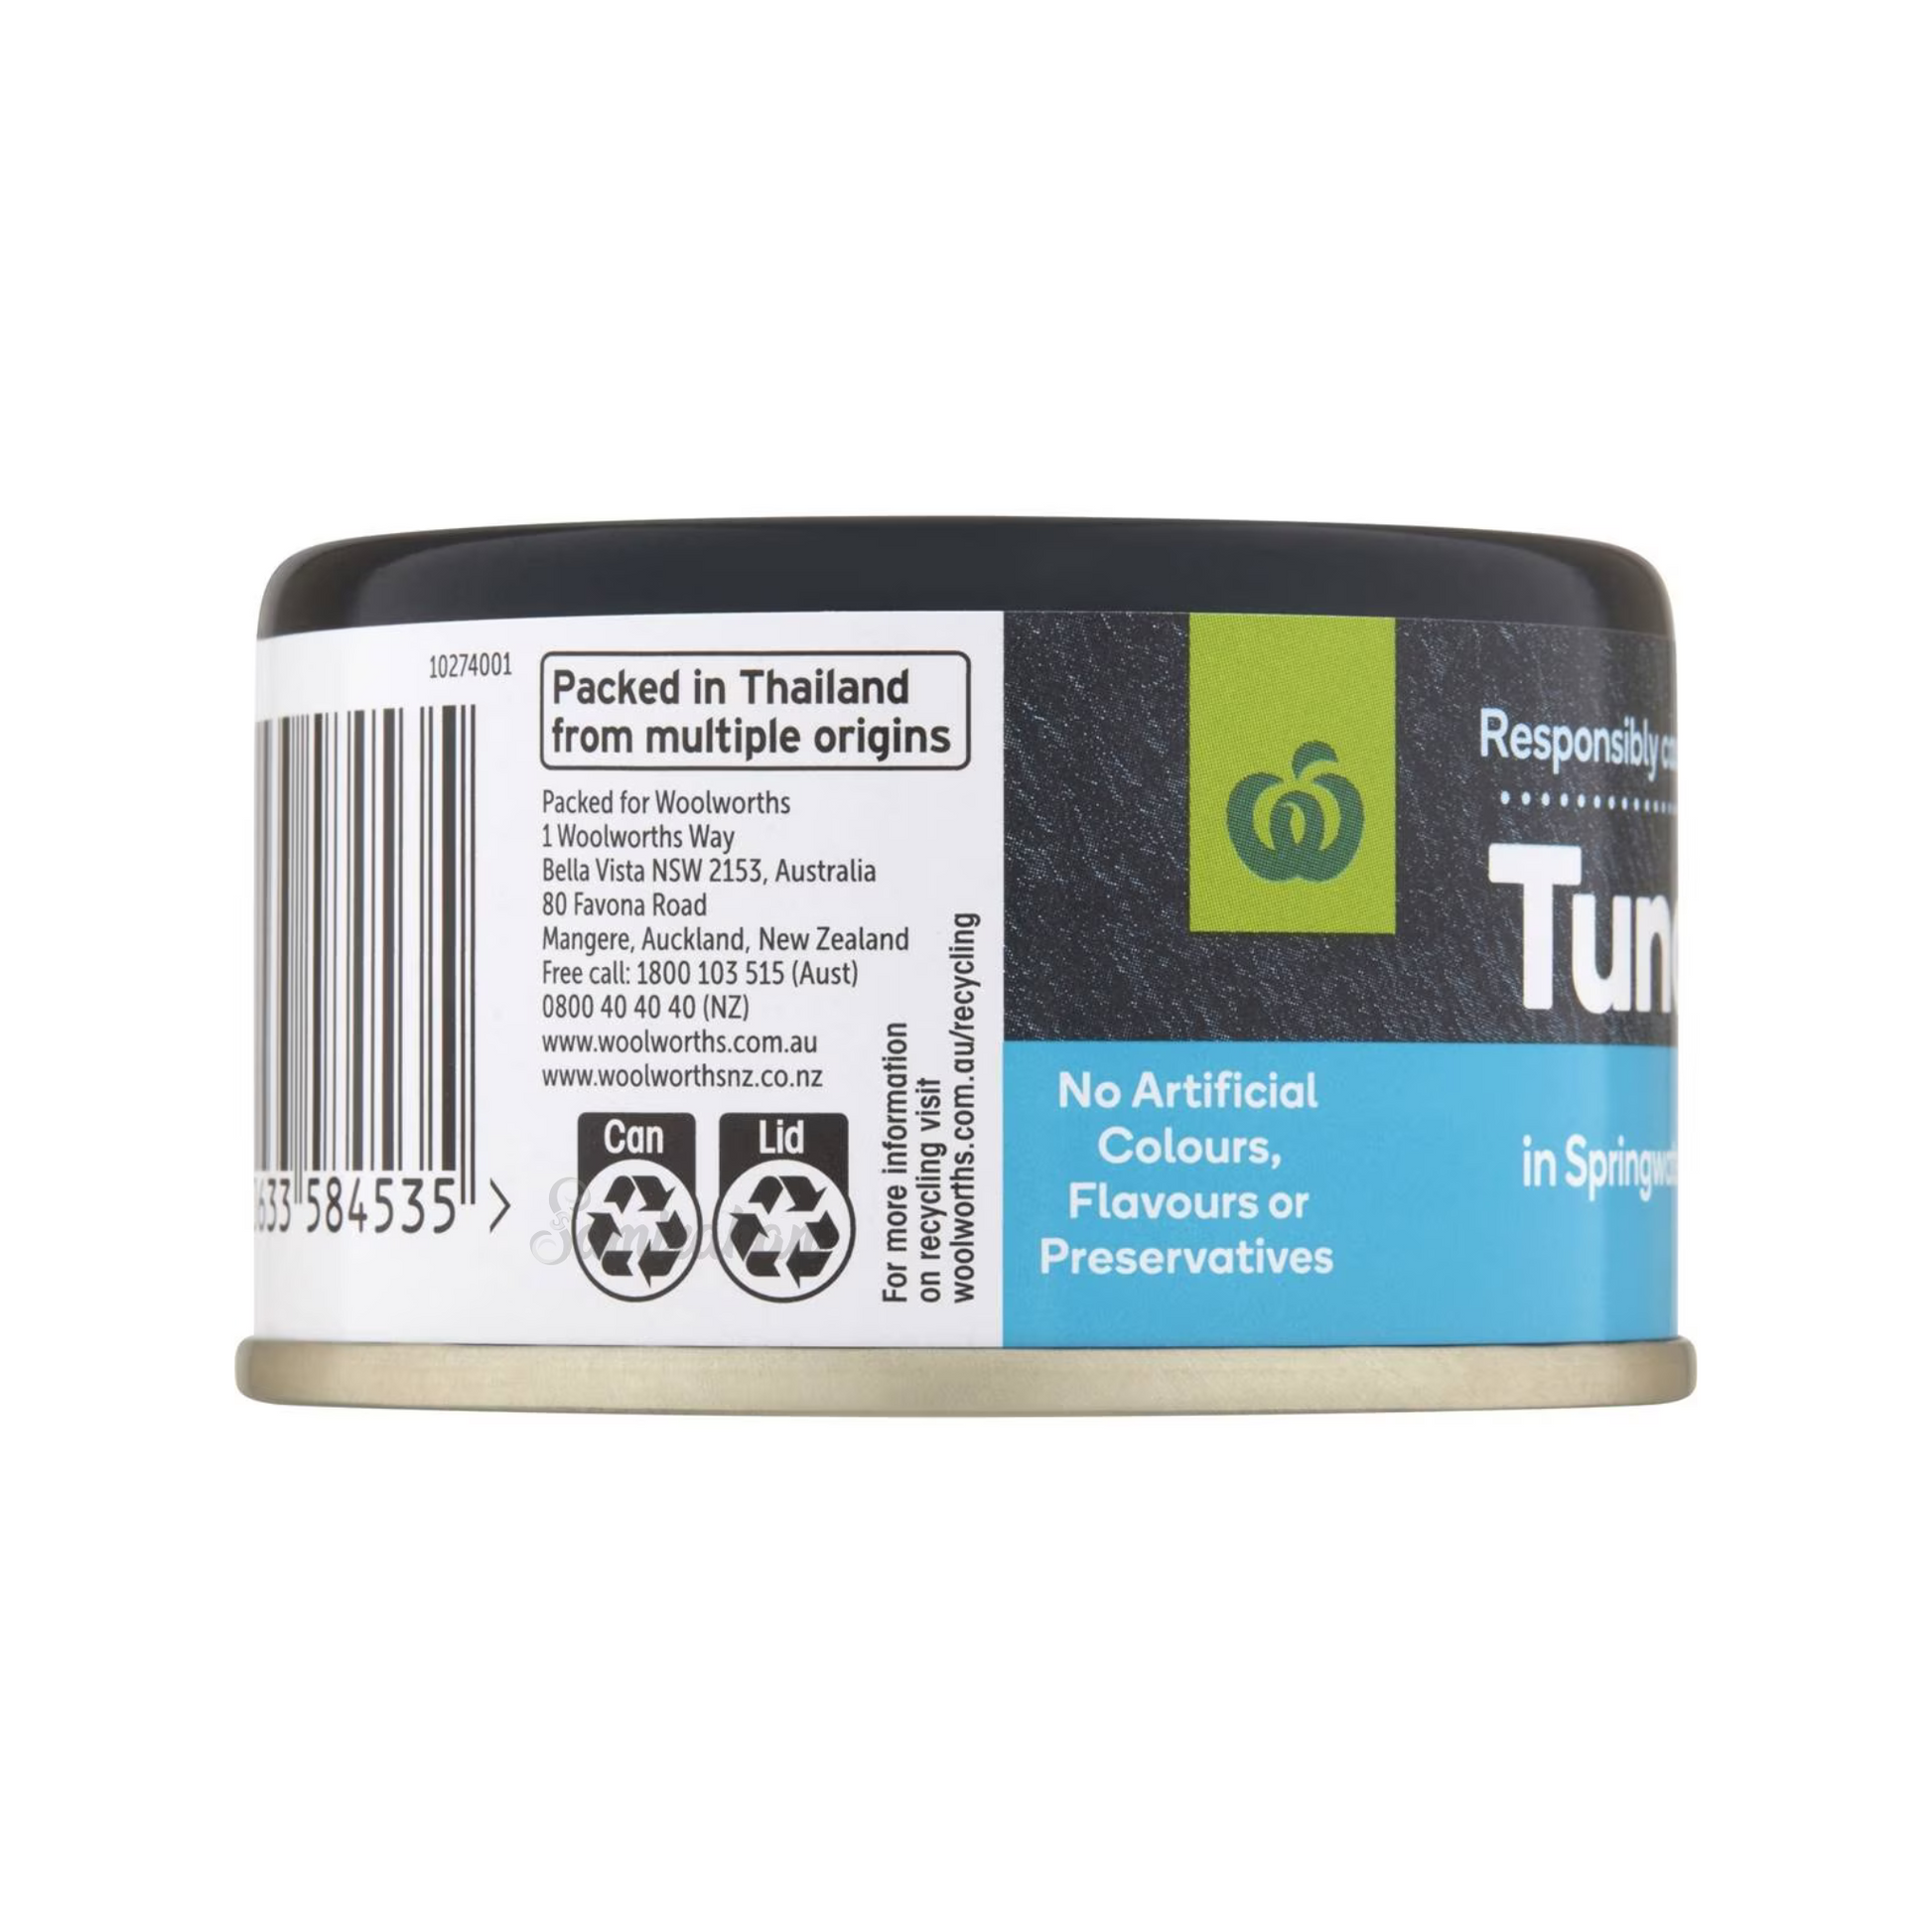 Woolies Tuna in Springwater is wild caught tuna high in Omega 3 & has an Australian Health Star Rating of 4.5. No artificial colors, flavours or preservatives. Best cheap genuine imported foreign Australian Thai canned tuna Aussie seafood health food cooking fish can safe to eat healthy price in Dhaka Bangladesh.